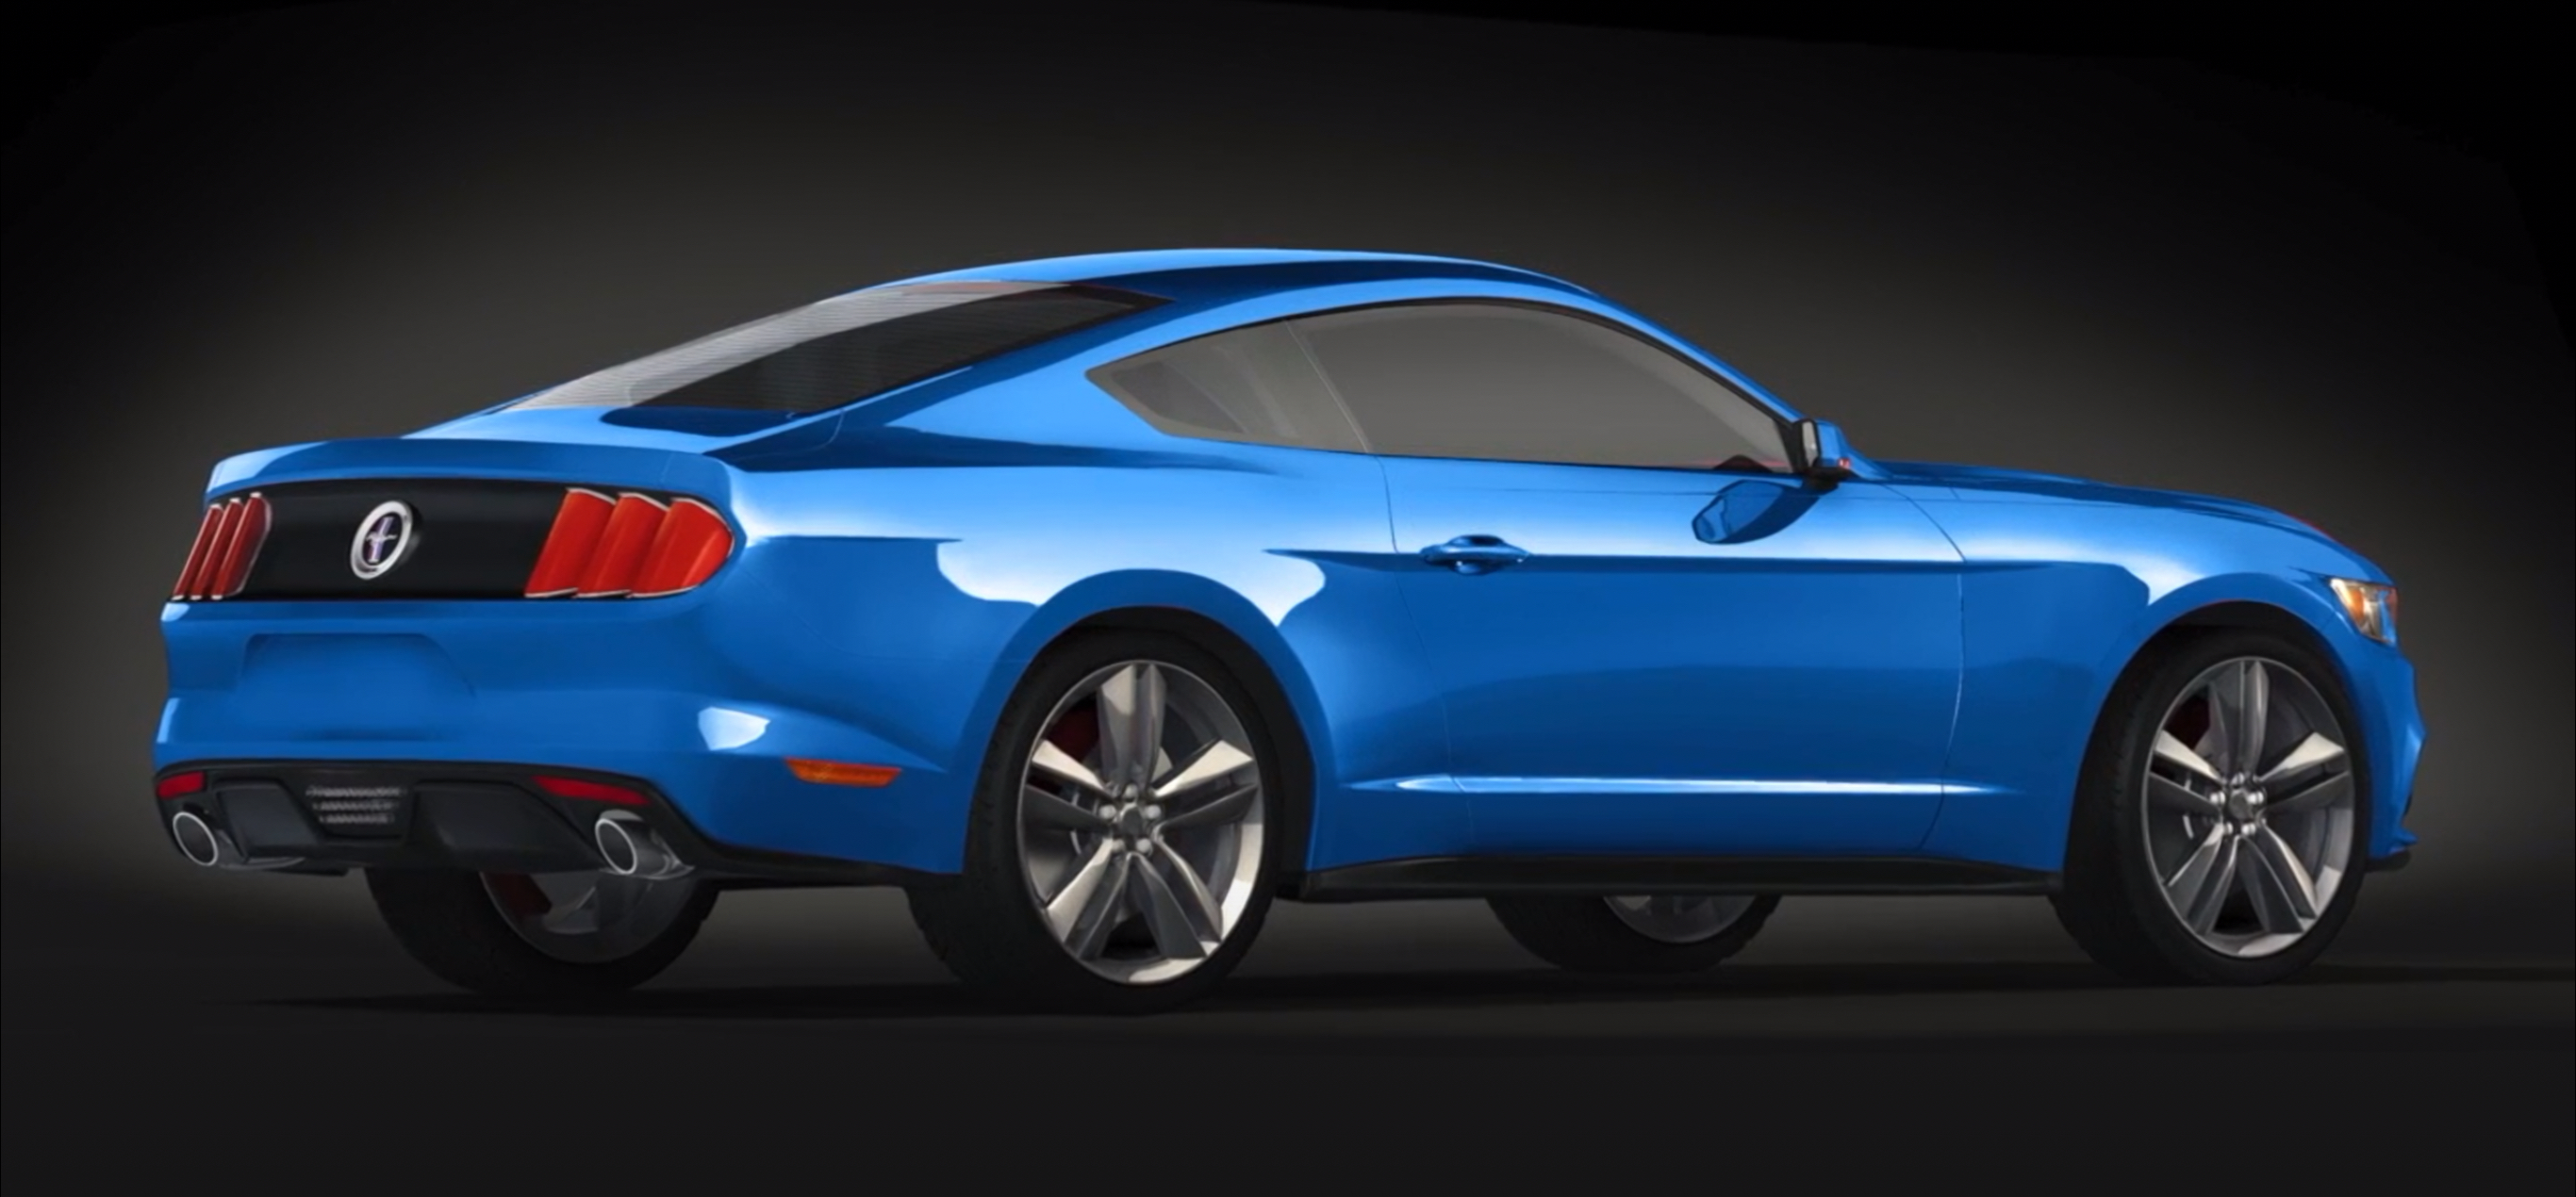 S650 Mustang chazcron weighs in... 7th gen 2023 Mustang S650 3D model & renderings in several colors! 1660108103227